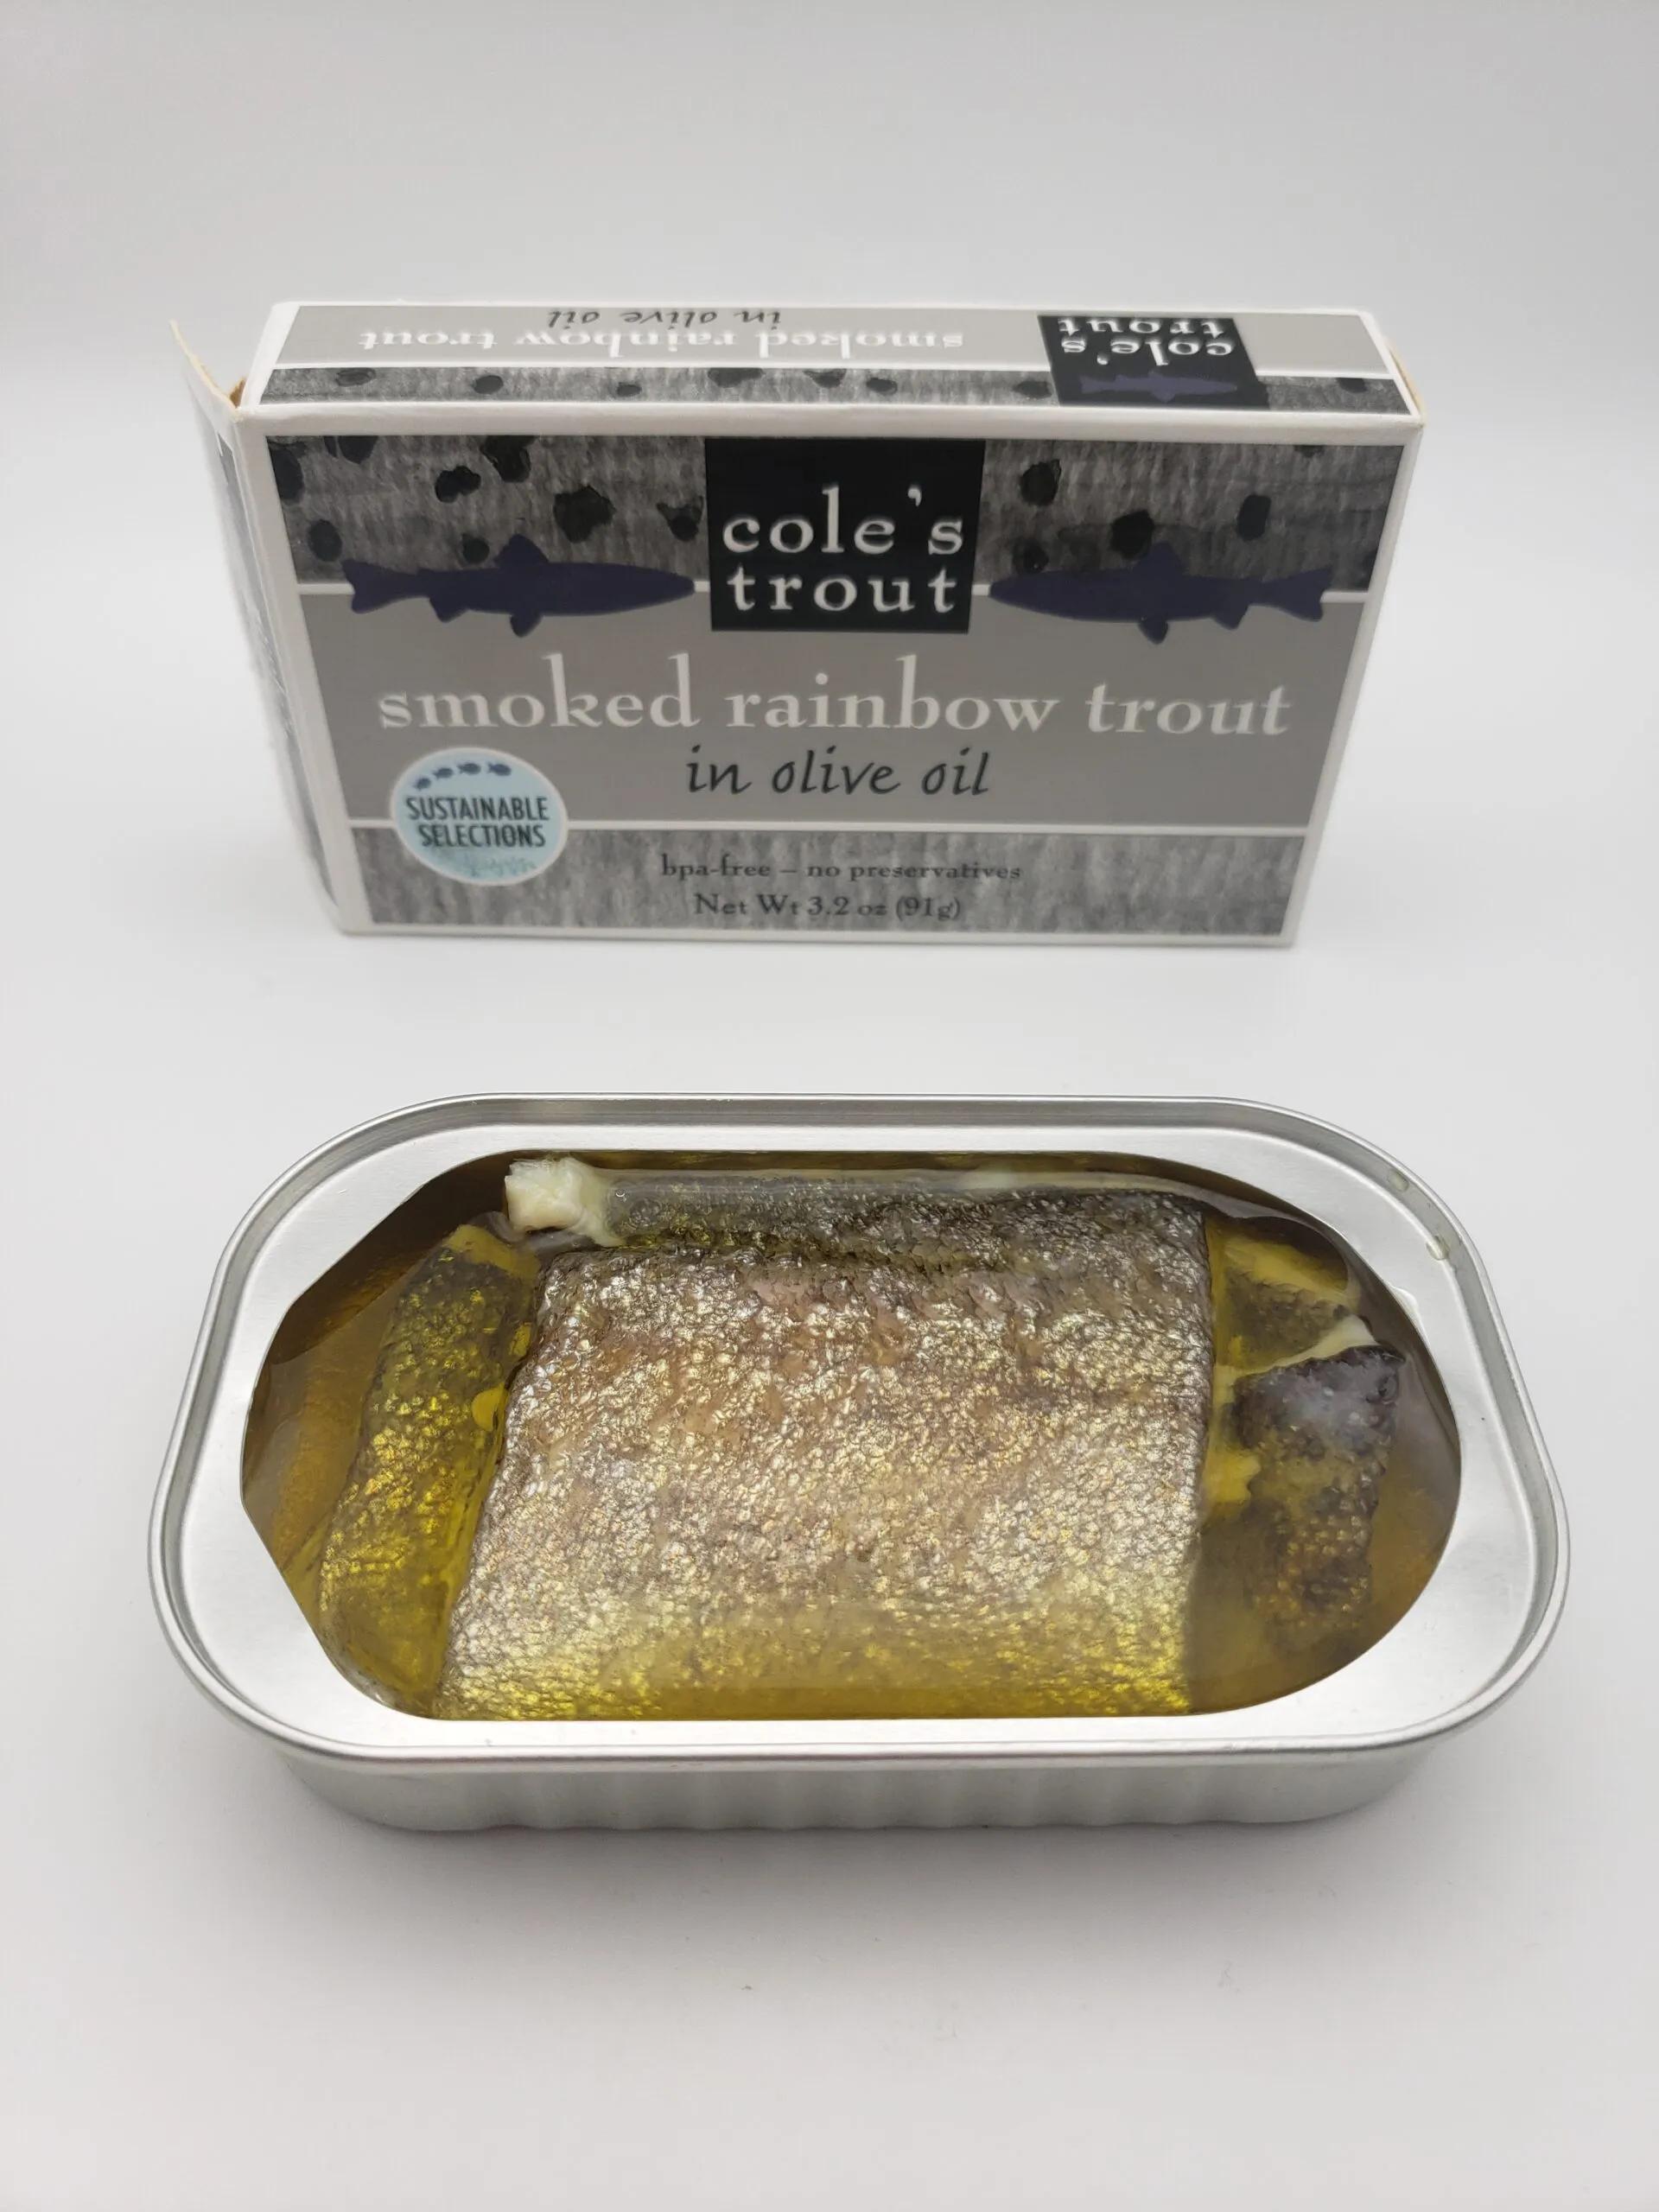 canned smoked trout - How do you preserve smoked trout